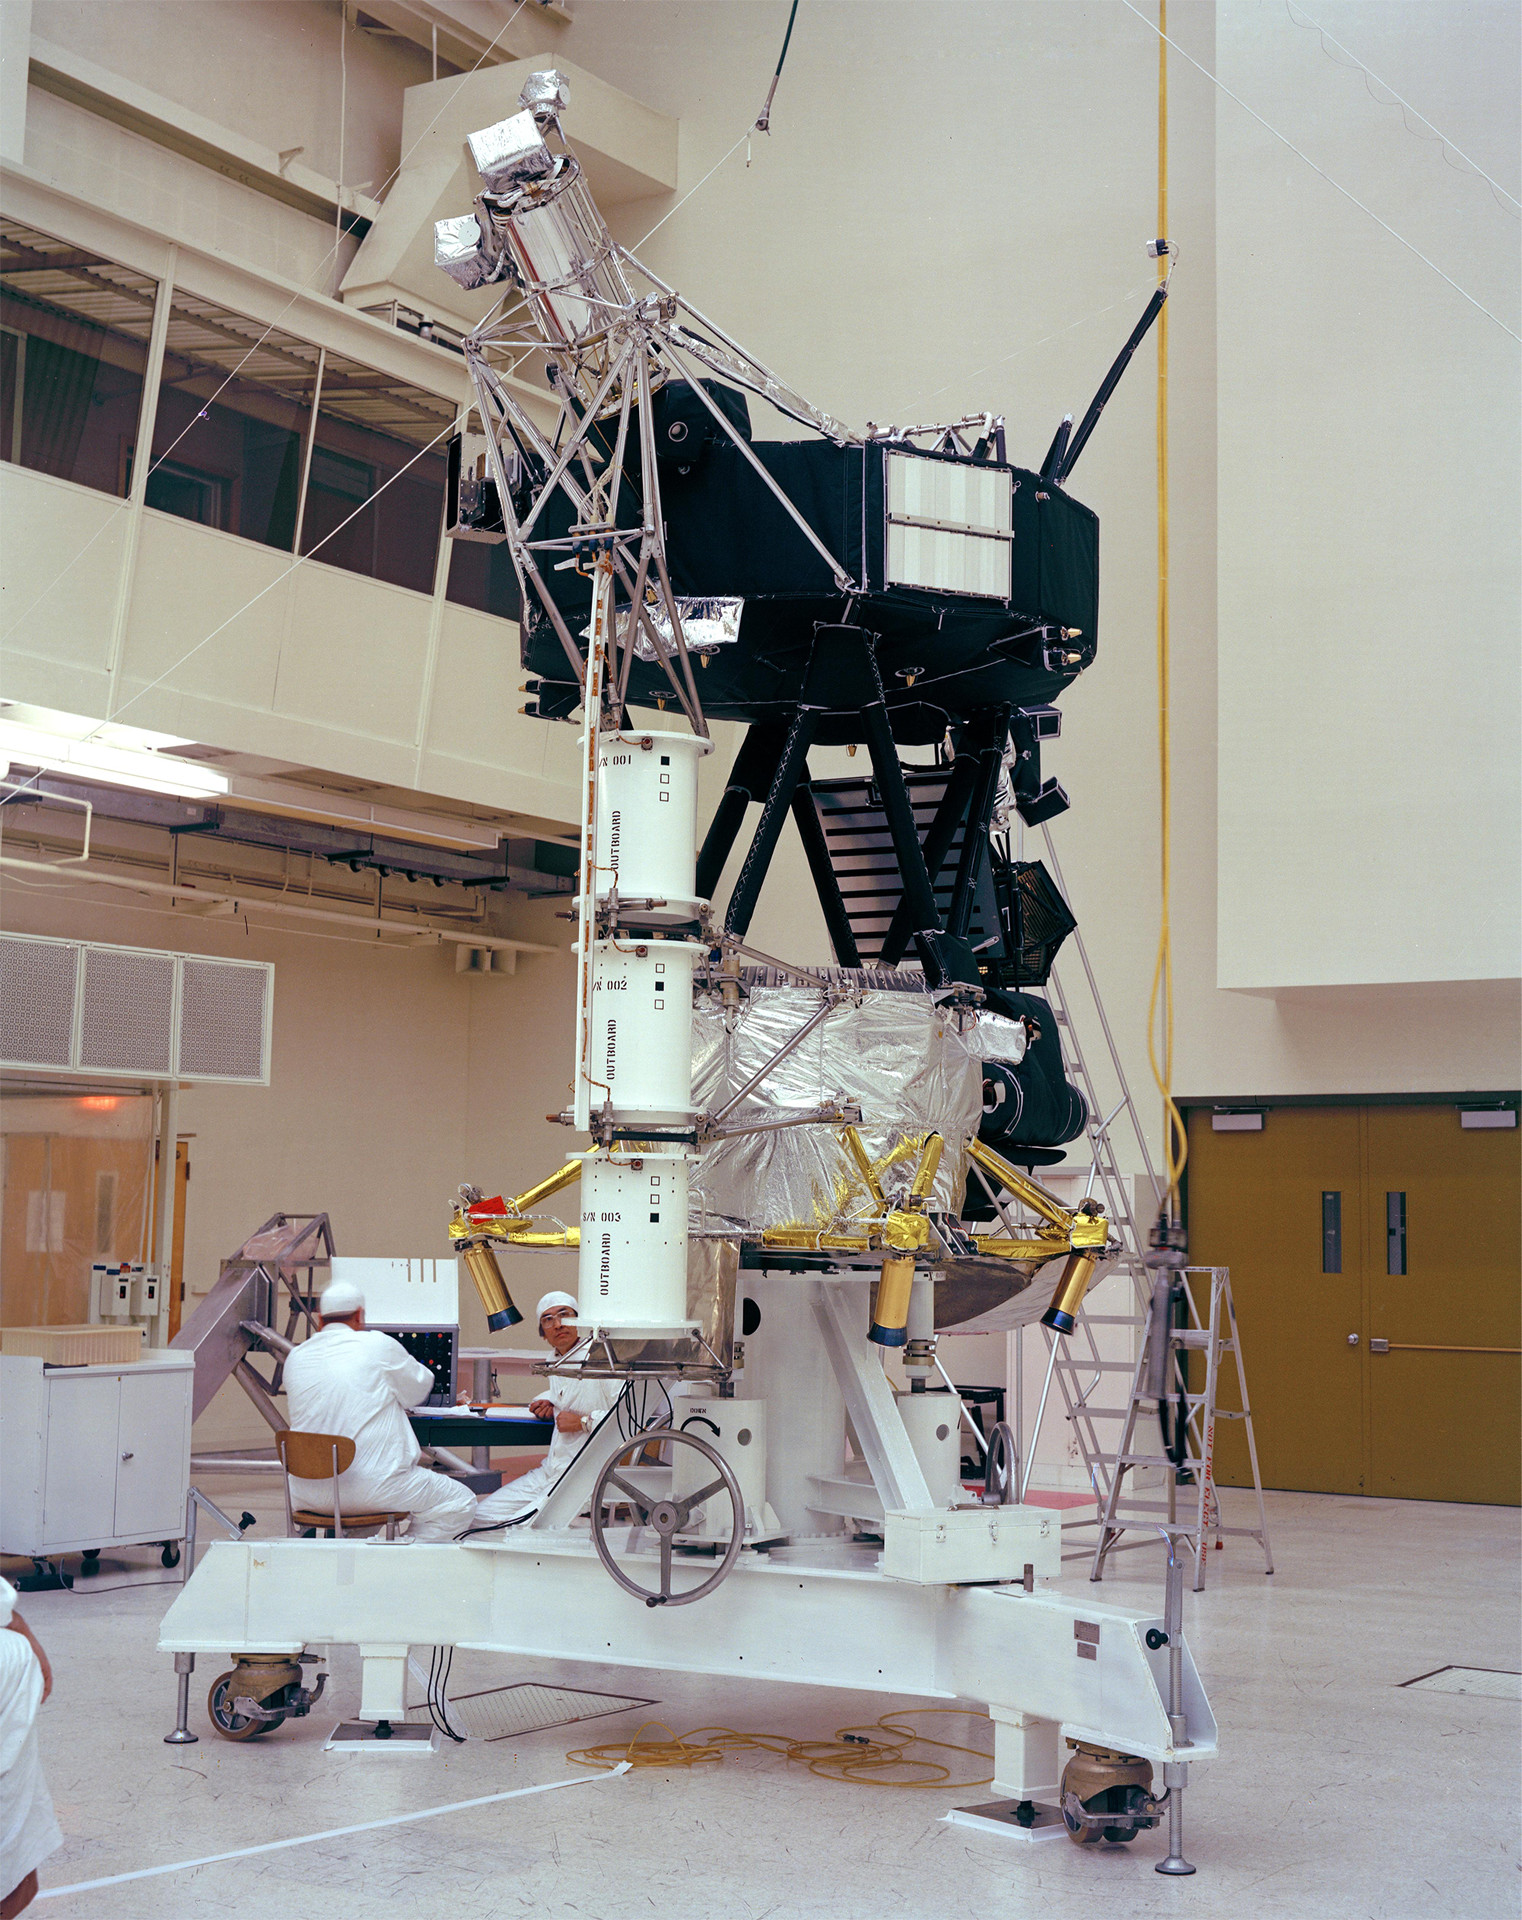 Voyager Proof Test Model undergoing a mechanical preparation and weight center of gravity test